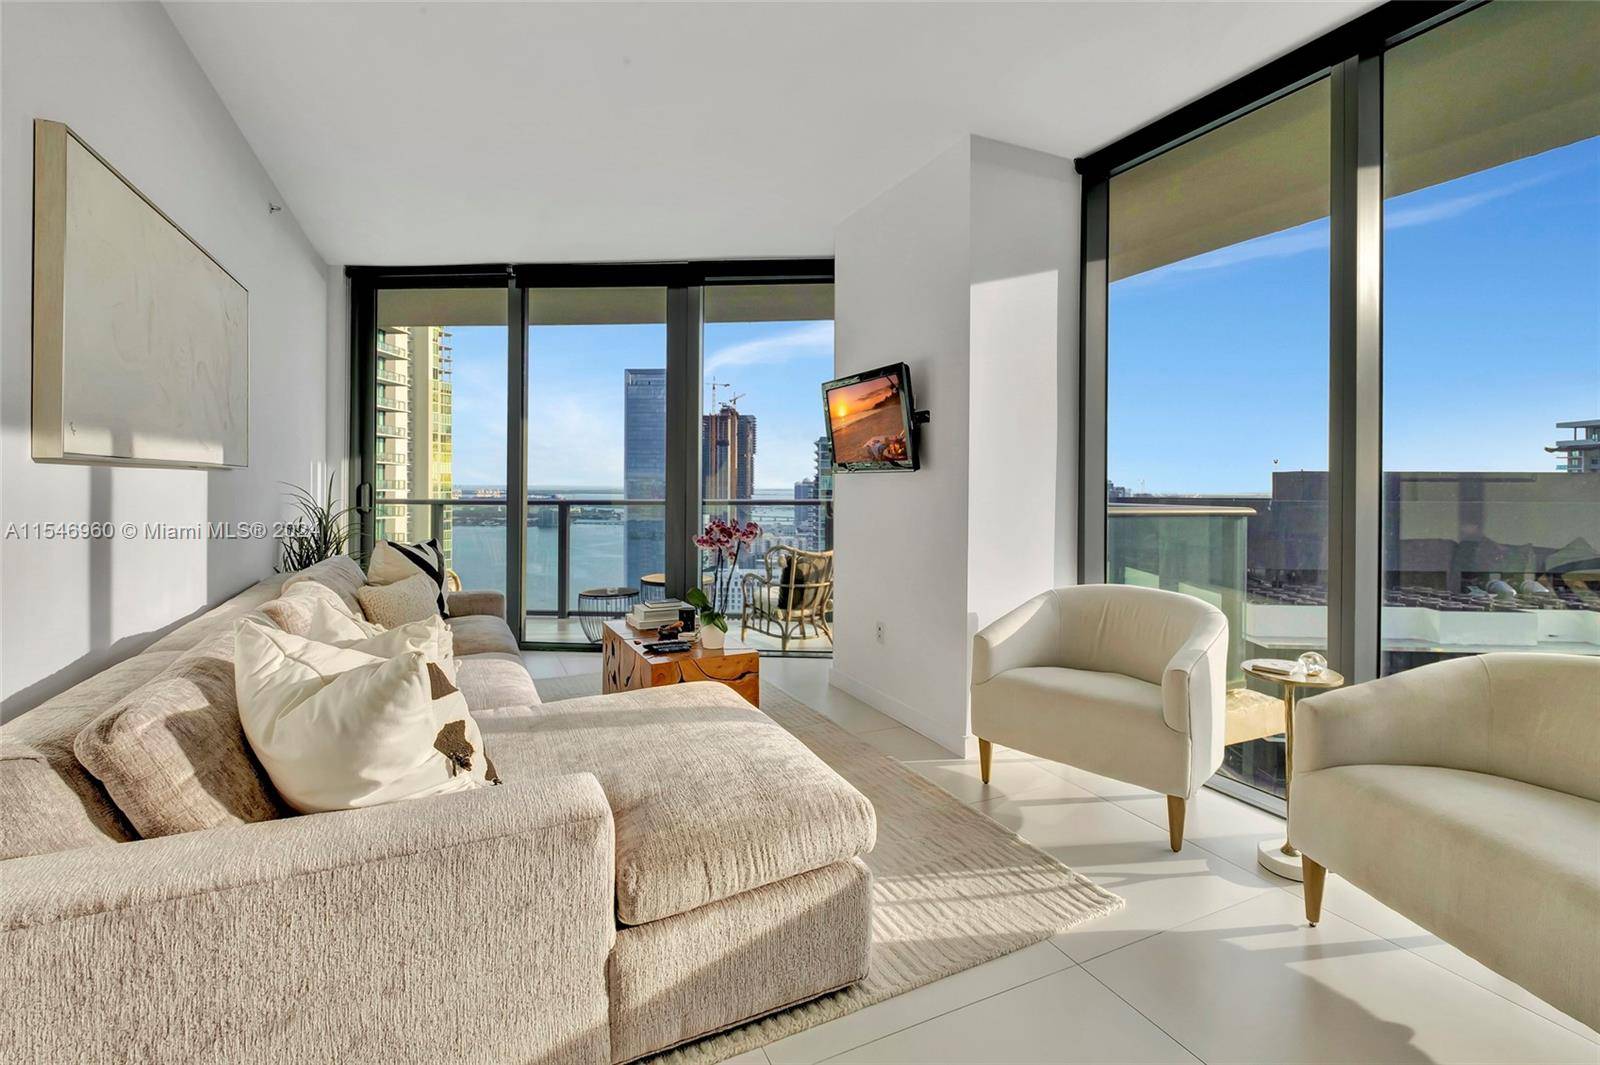 Welcome to your luxurious slice of paradise in the prestigious Edgewater neighborhood, where urban sophistication meets serene waterfront living.